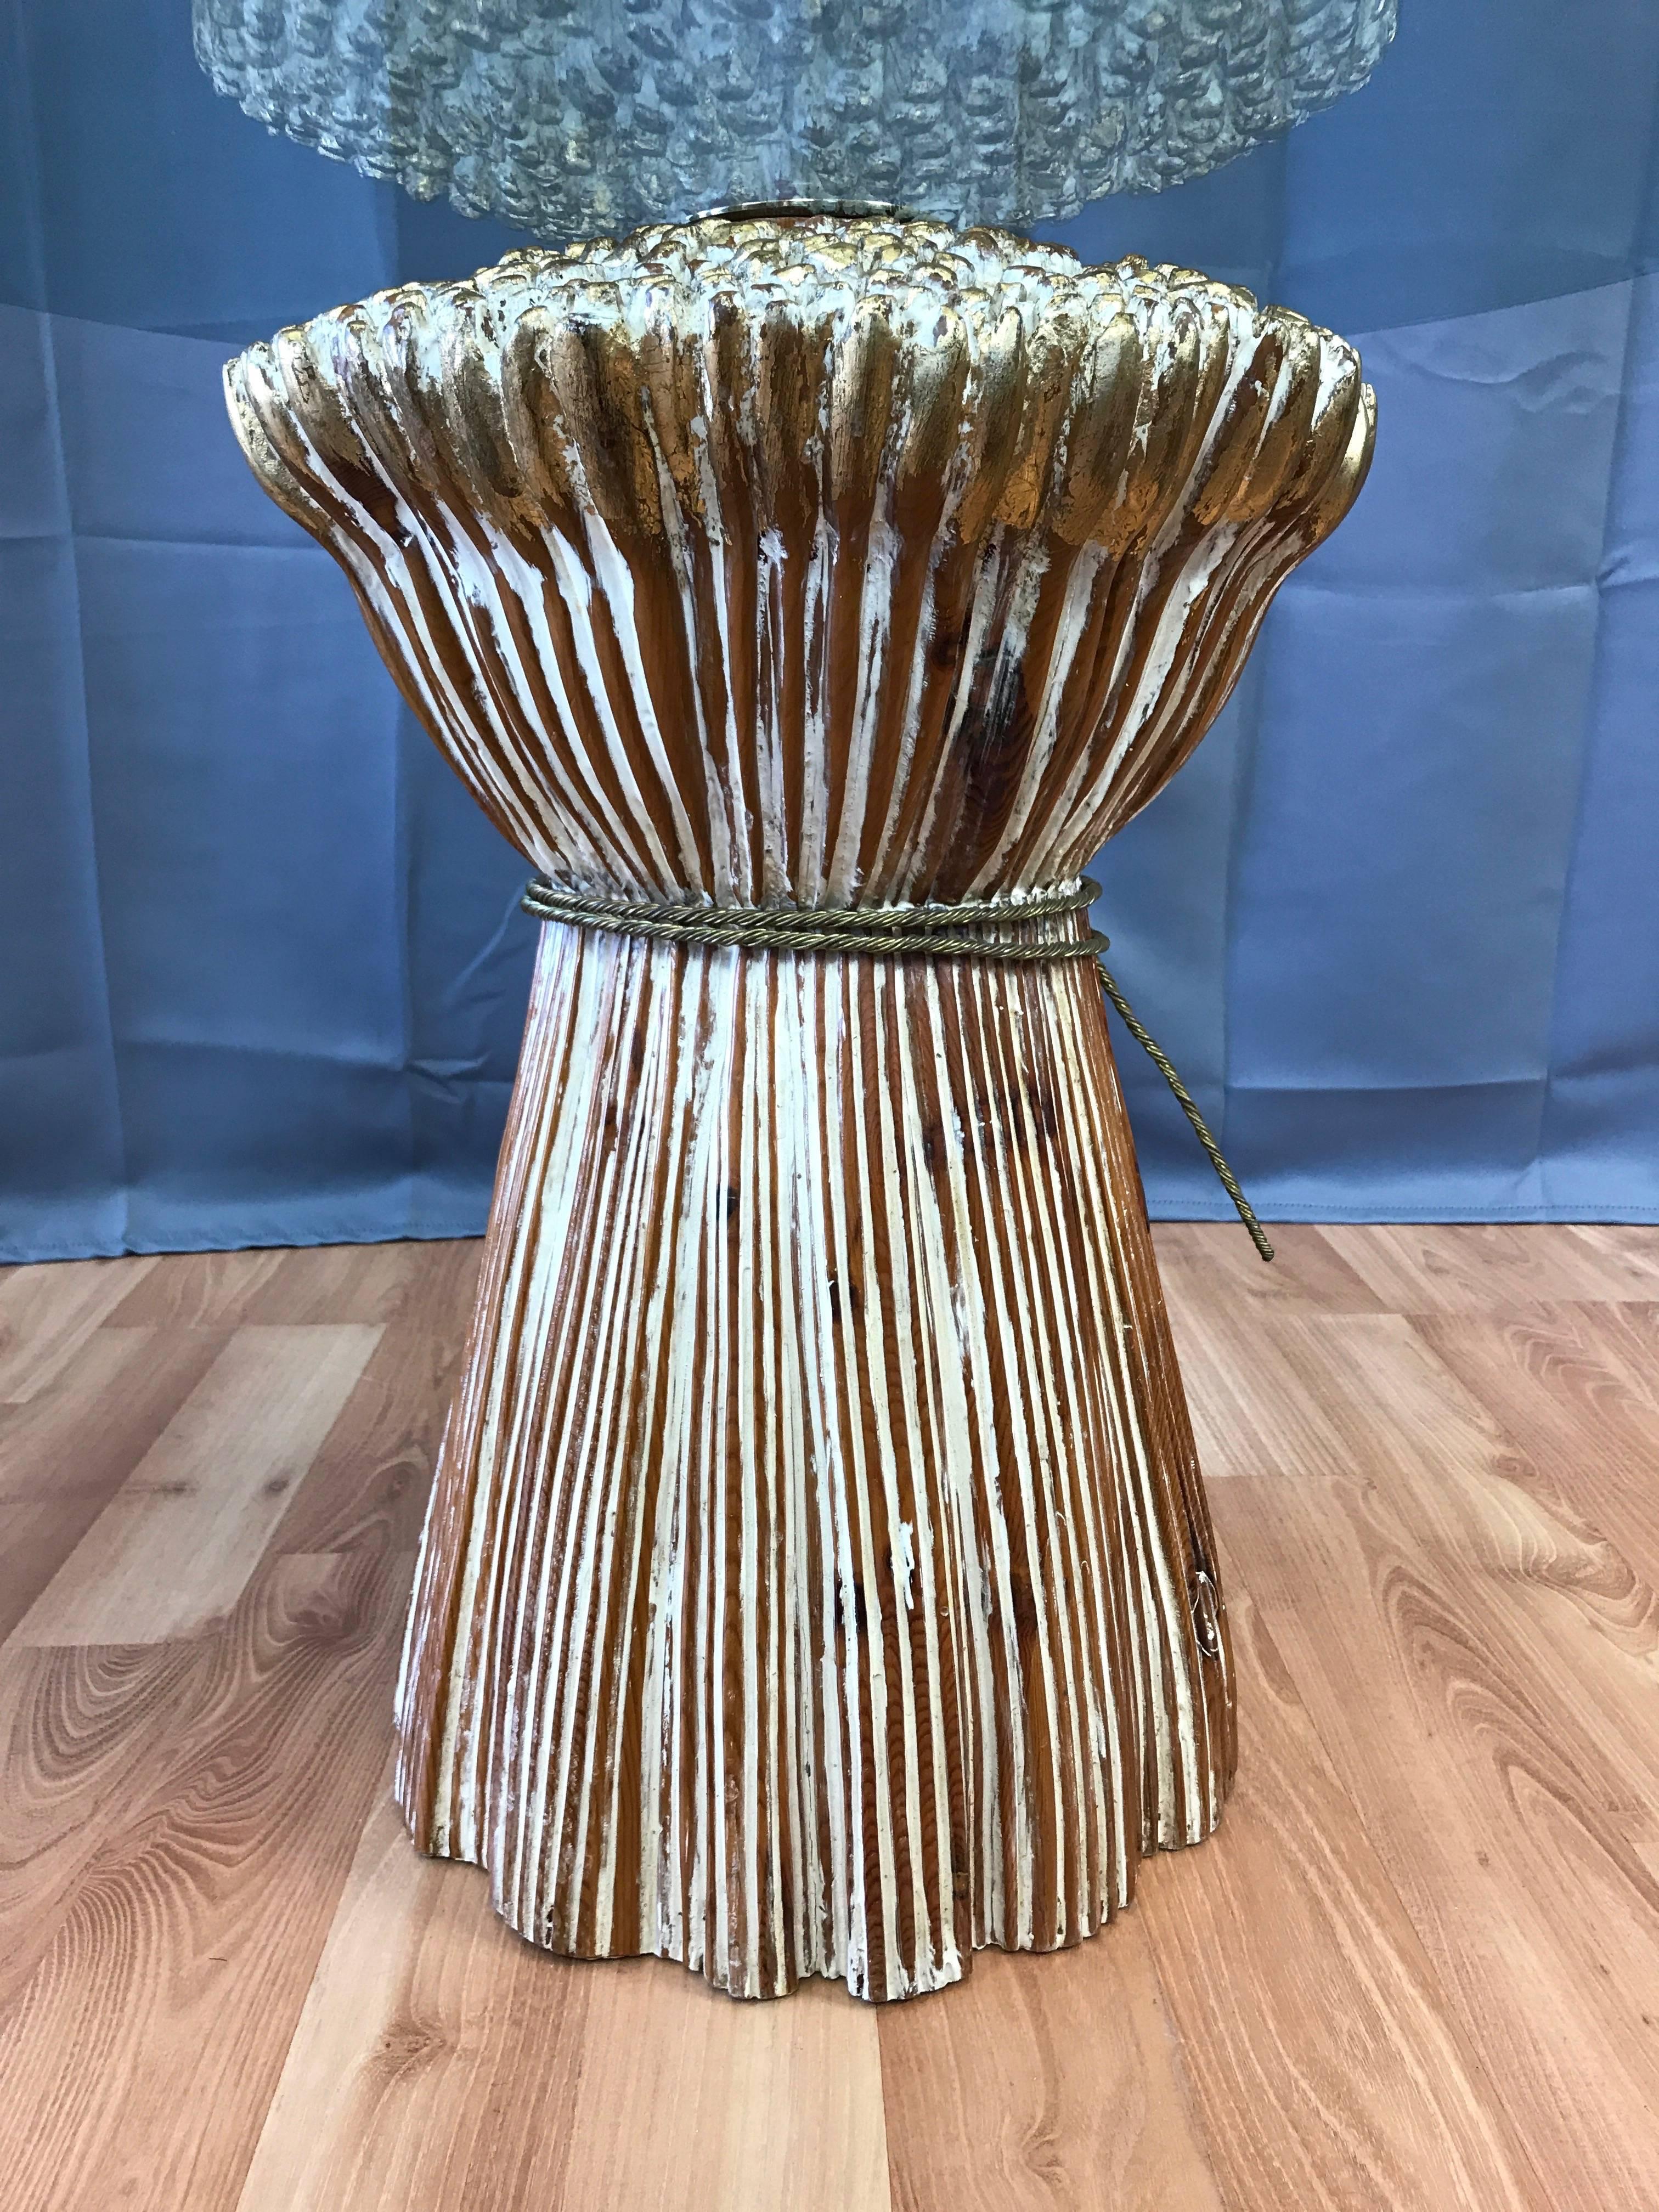 Sculptural Carved Wood Wheat Sheaf Table with Glass Top In Good Condition For Sale In San Francisco, CA